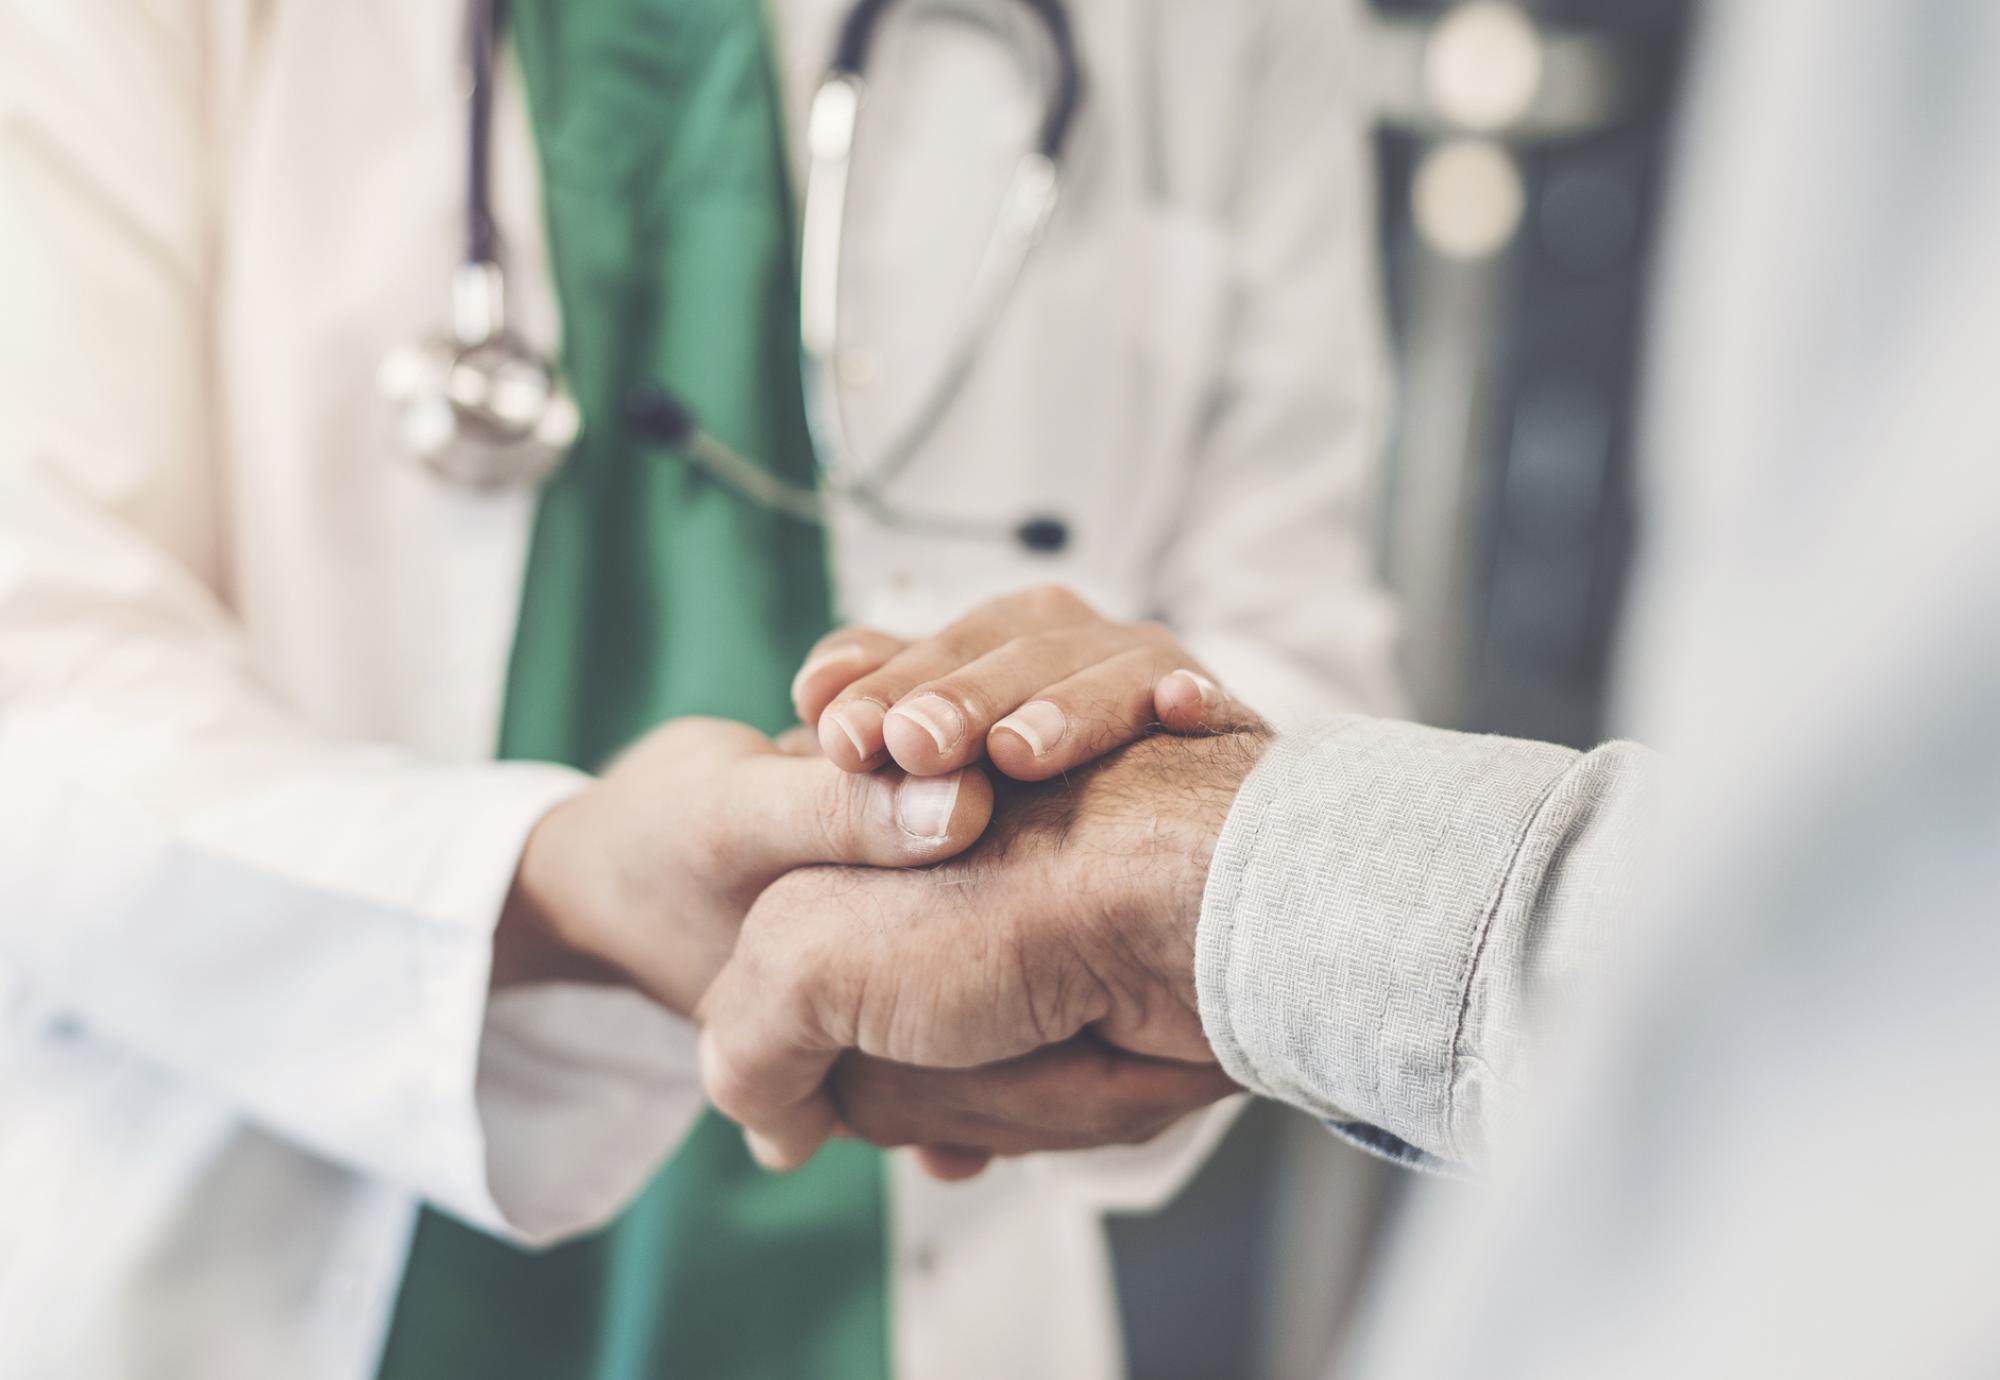 Health professional shaking hands with a patient